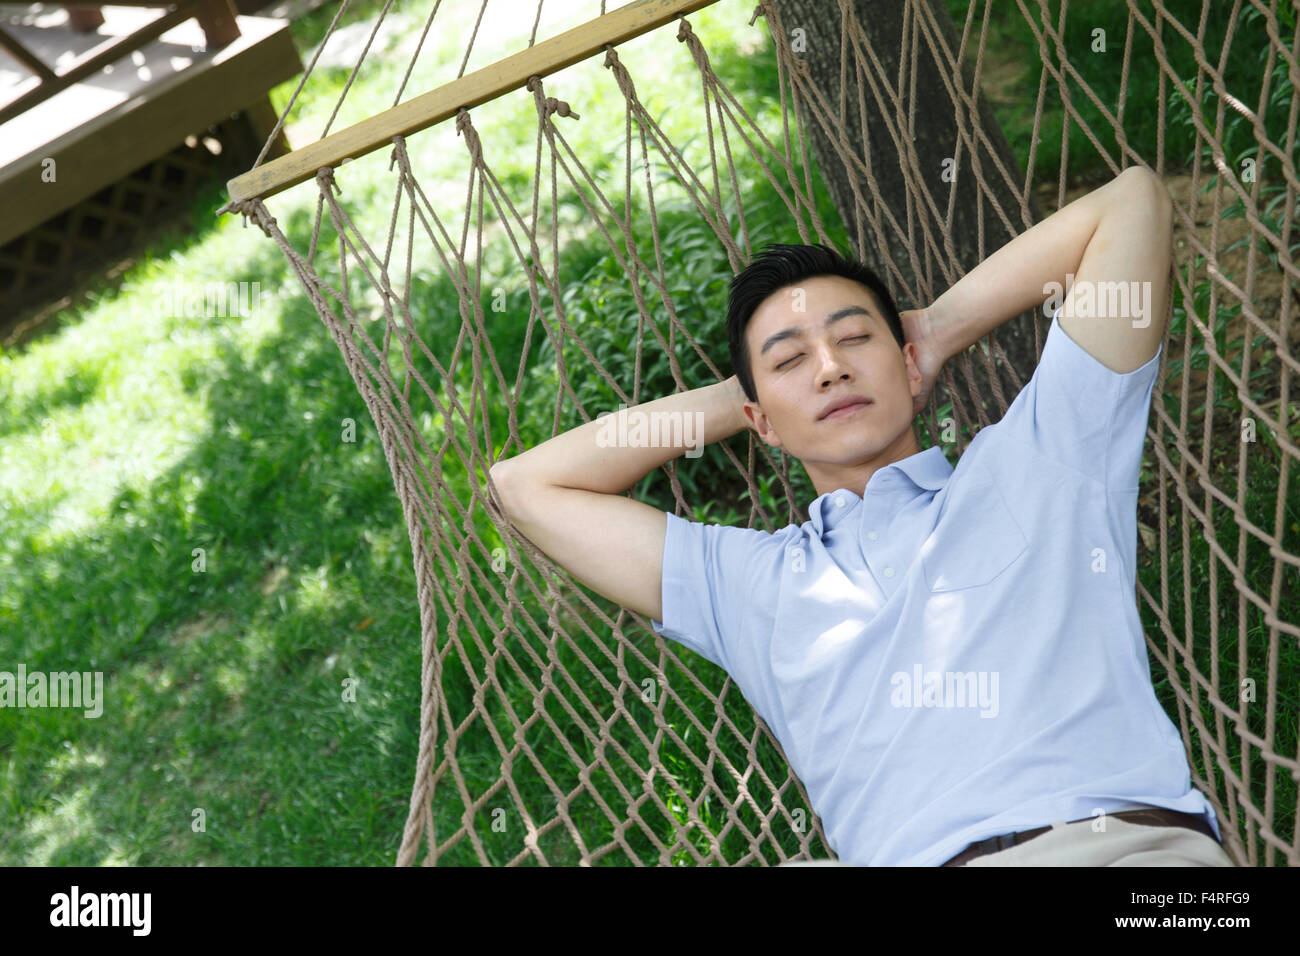 The young man is sleeping in a hammock Stock Photo